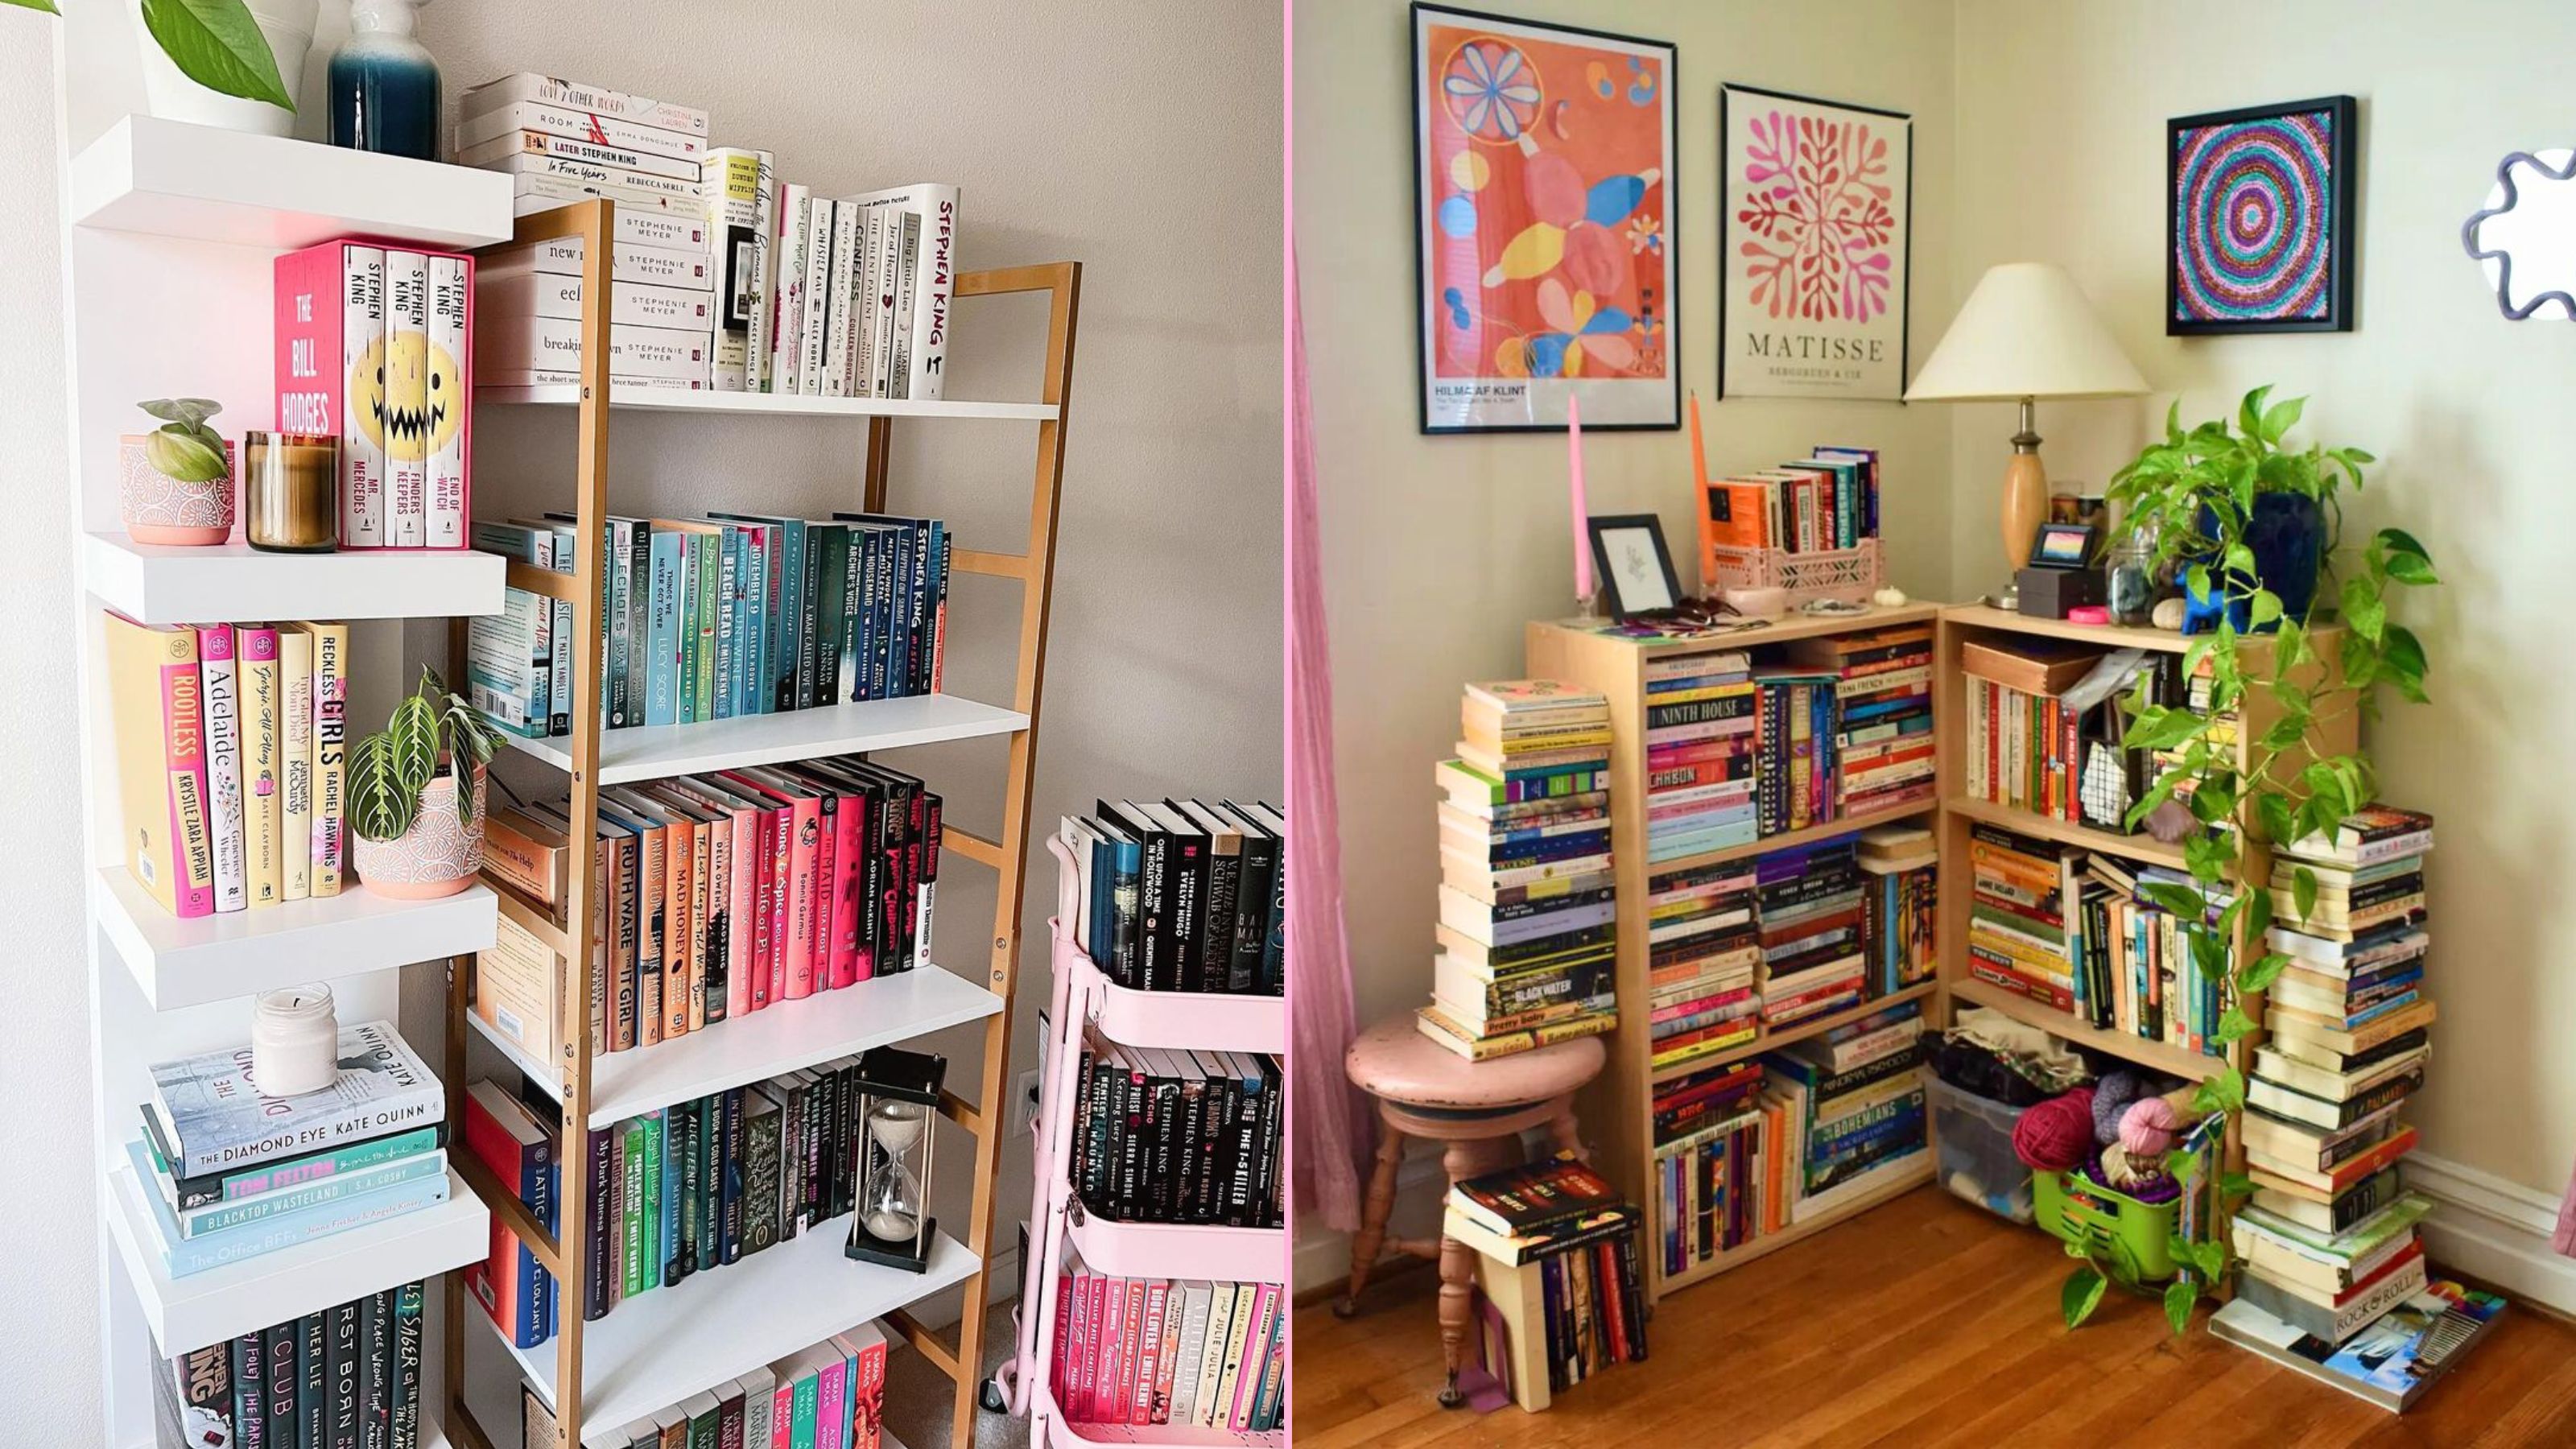 6 Organization Ideas for Your Bookshelves - Organizing Your Home